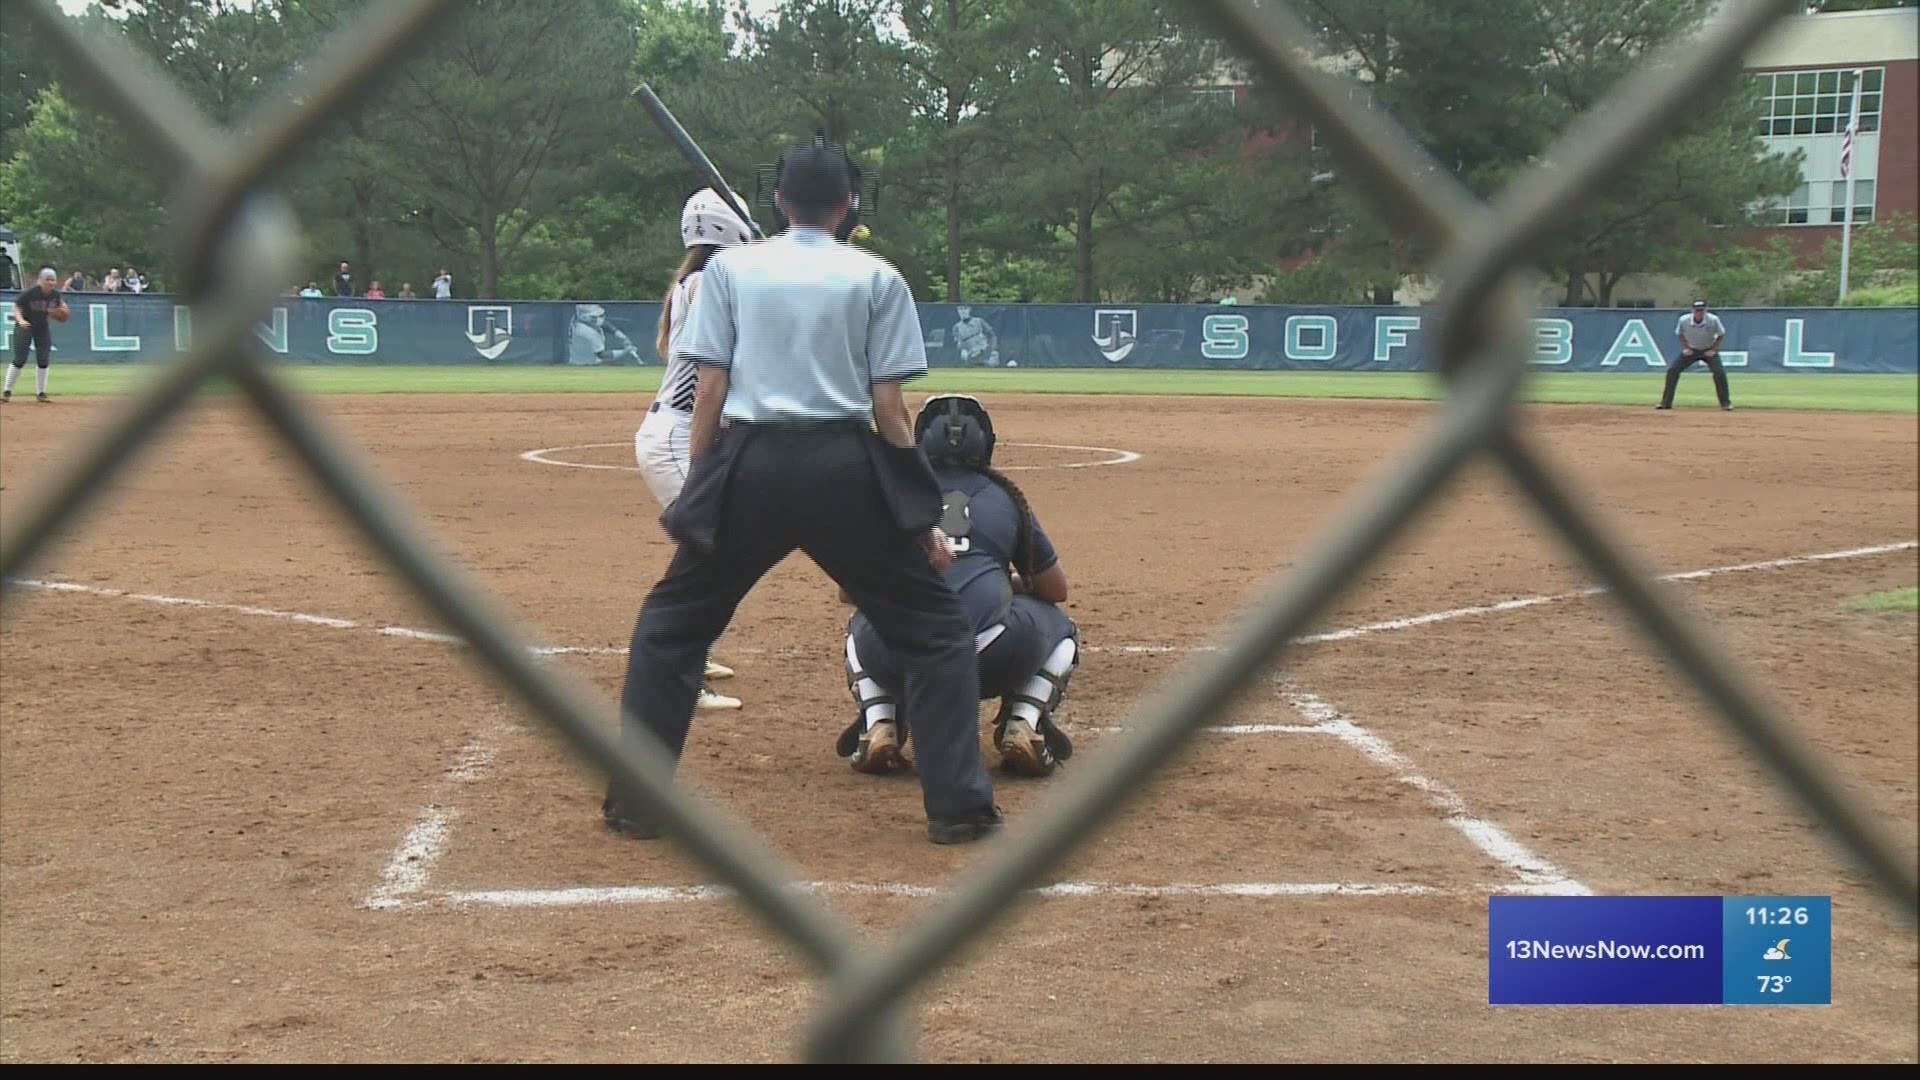 Top ranked Virginia Wesleyan had to wait another day as they took on Berry College in the NCAA Division III Super Regional. Rains suspended their matchup tied at 6-6 in the home 7th. They'll resume Sunday at 11am.